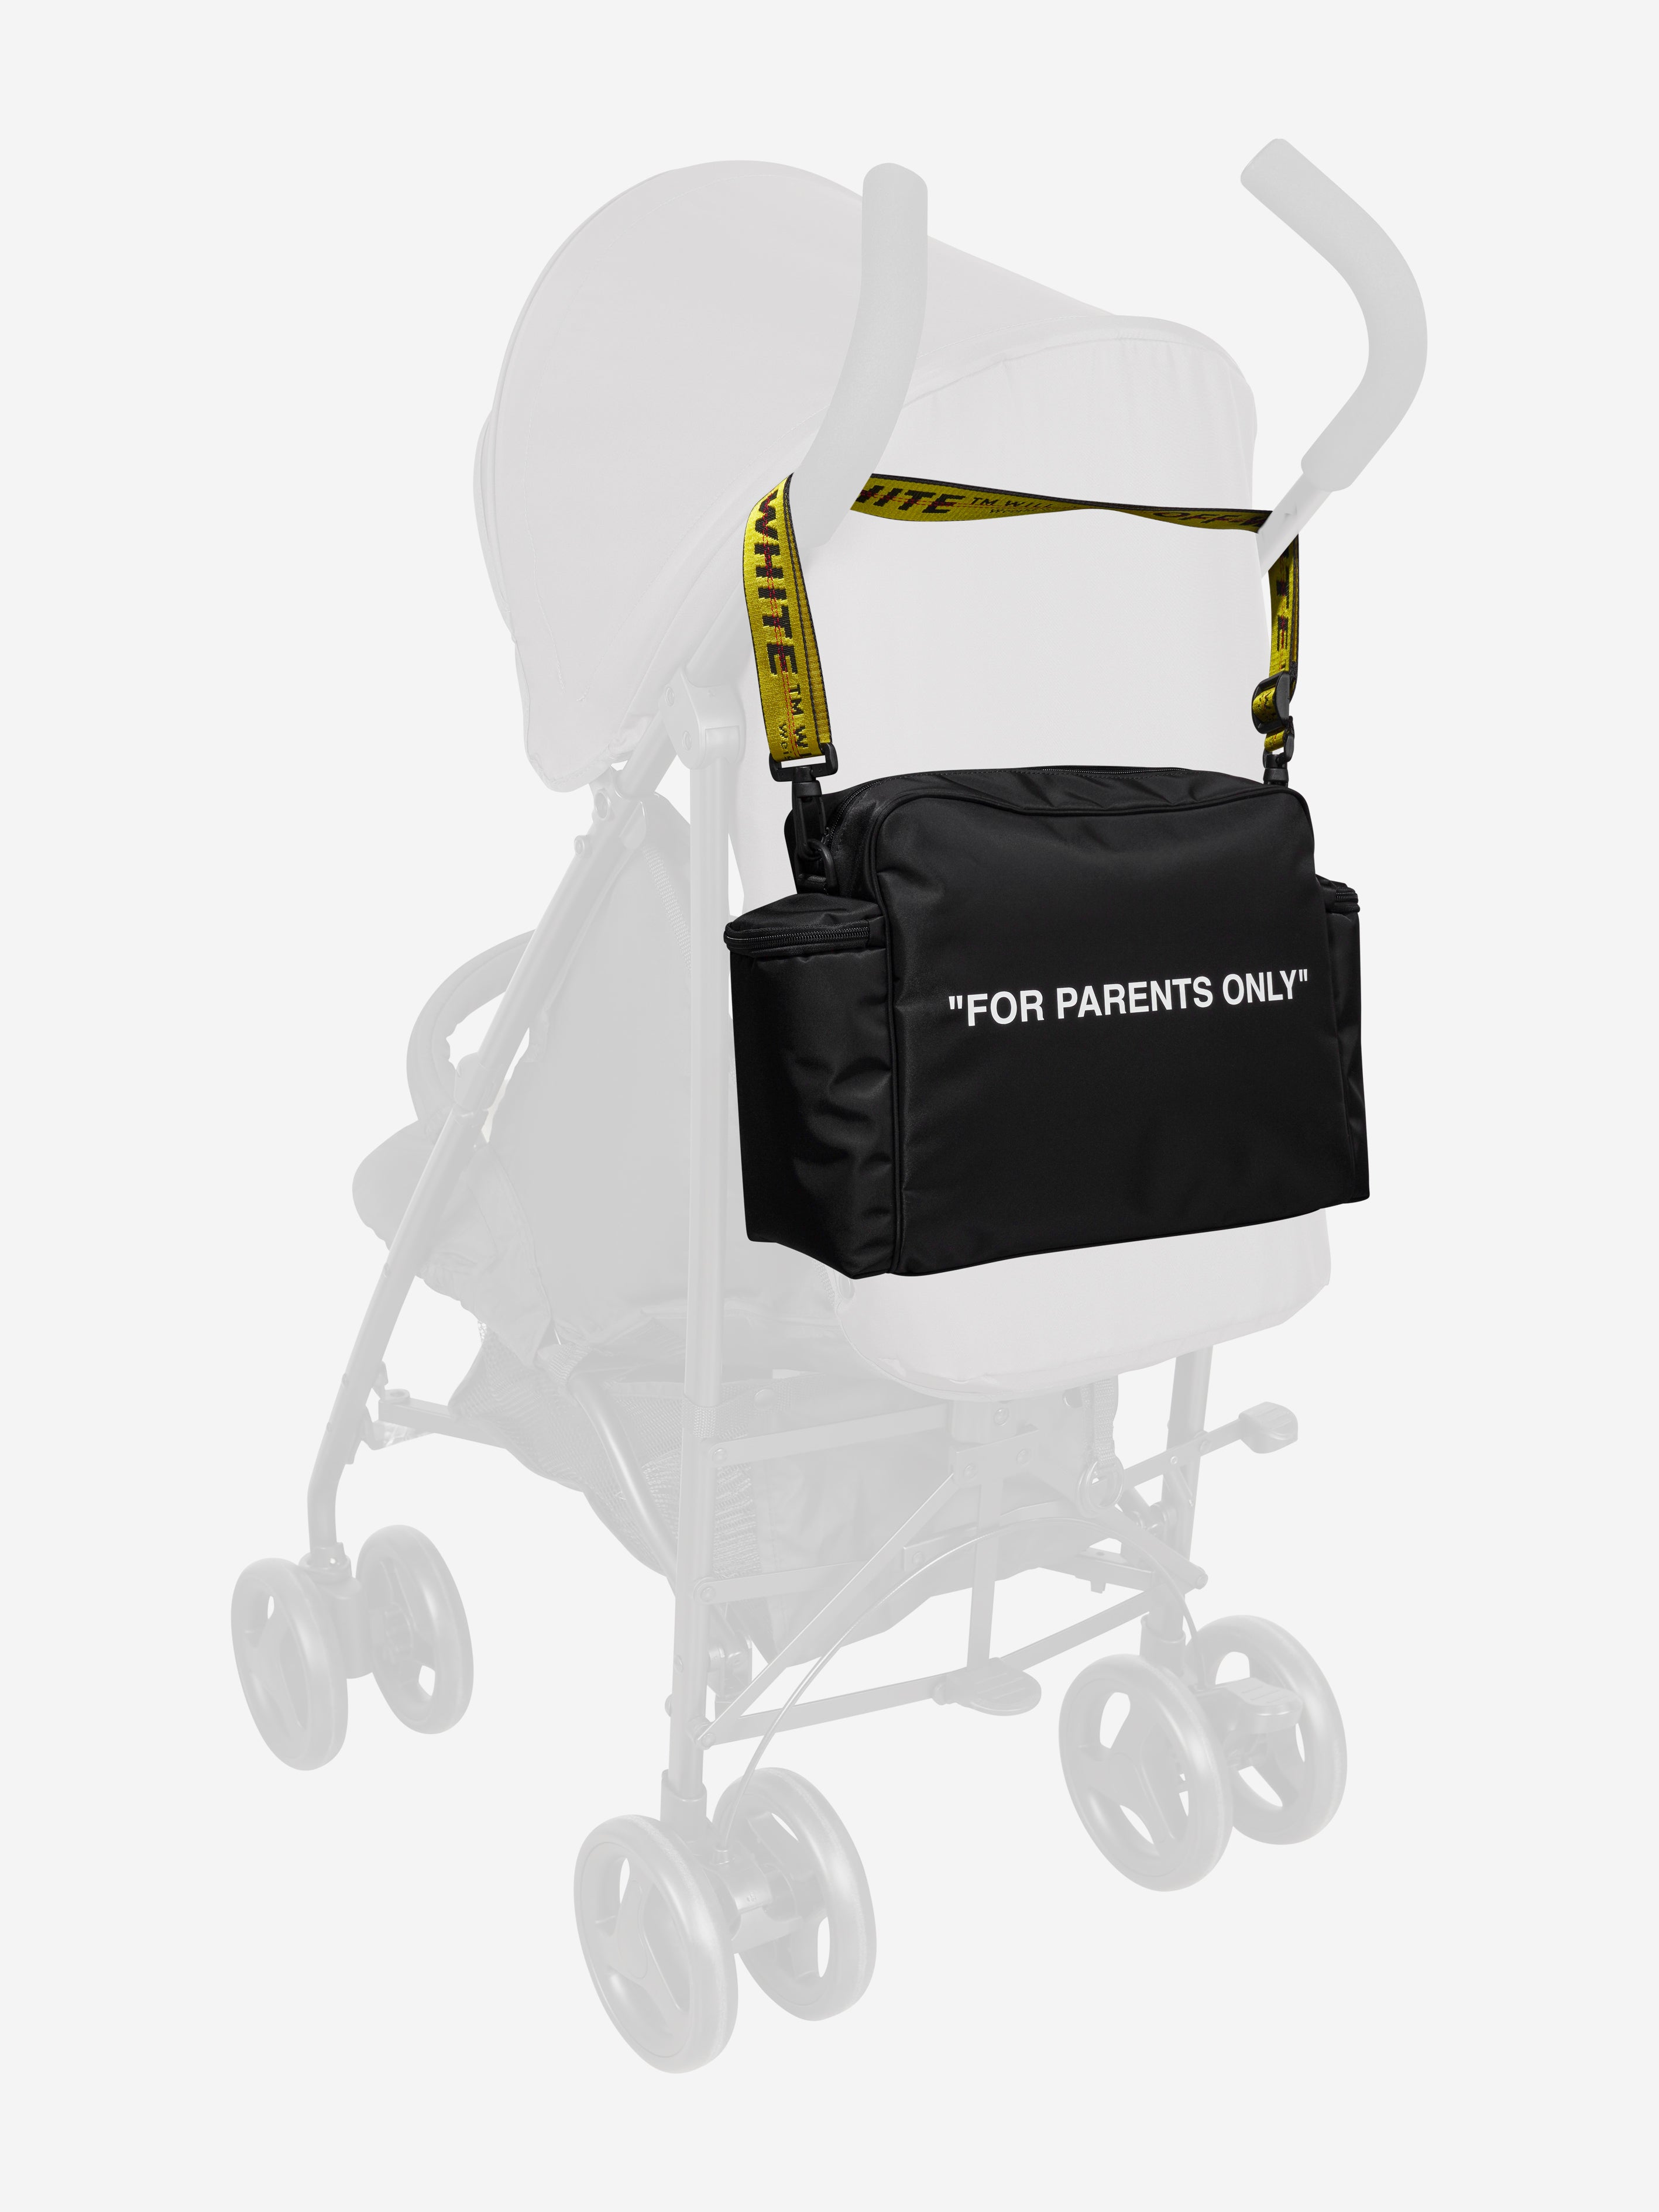 For Parents Only Mama Bag - Black/Yellow – Feature